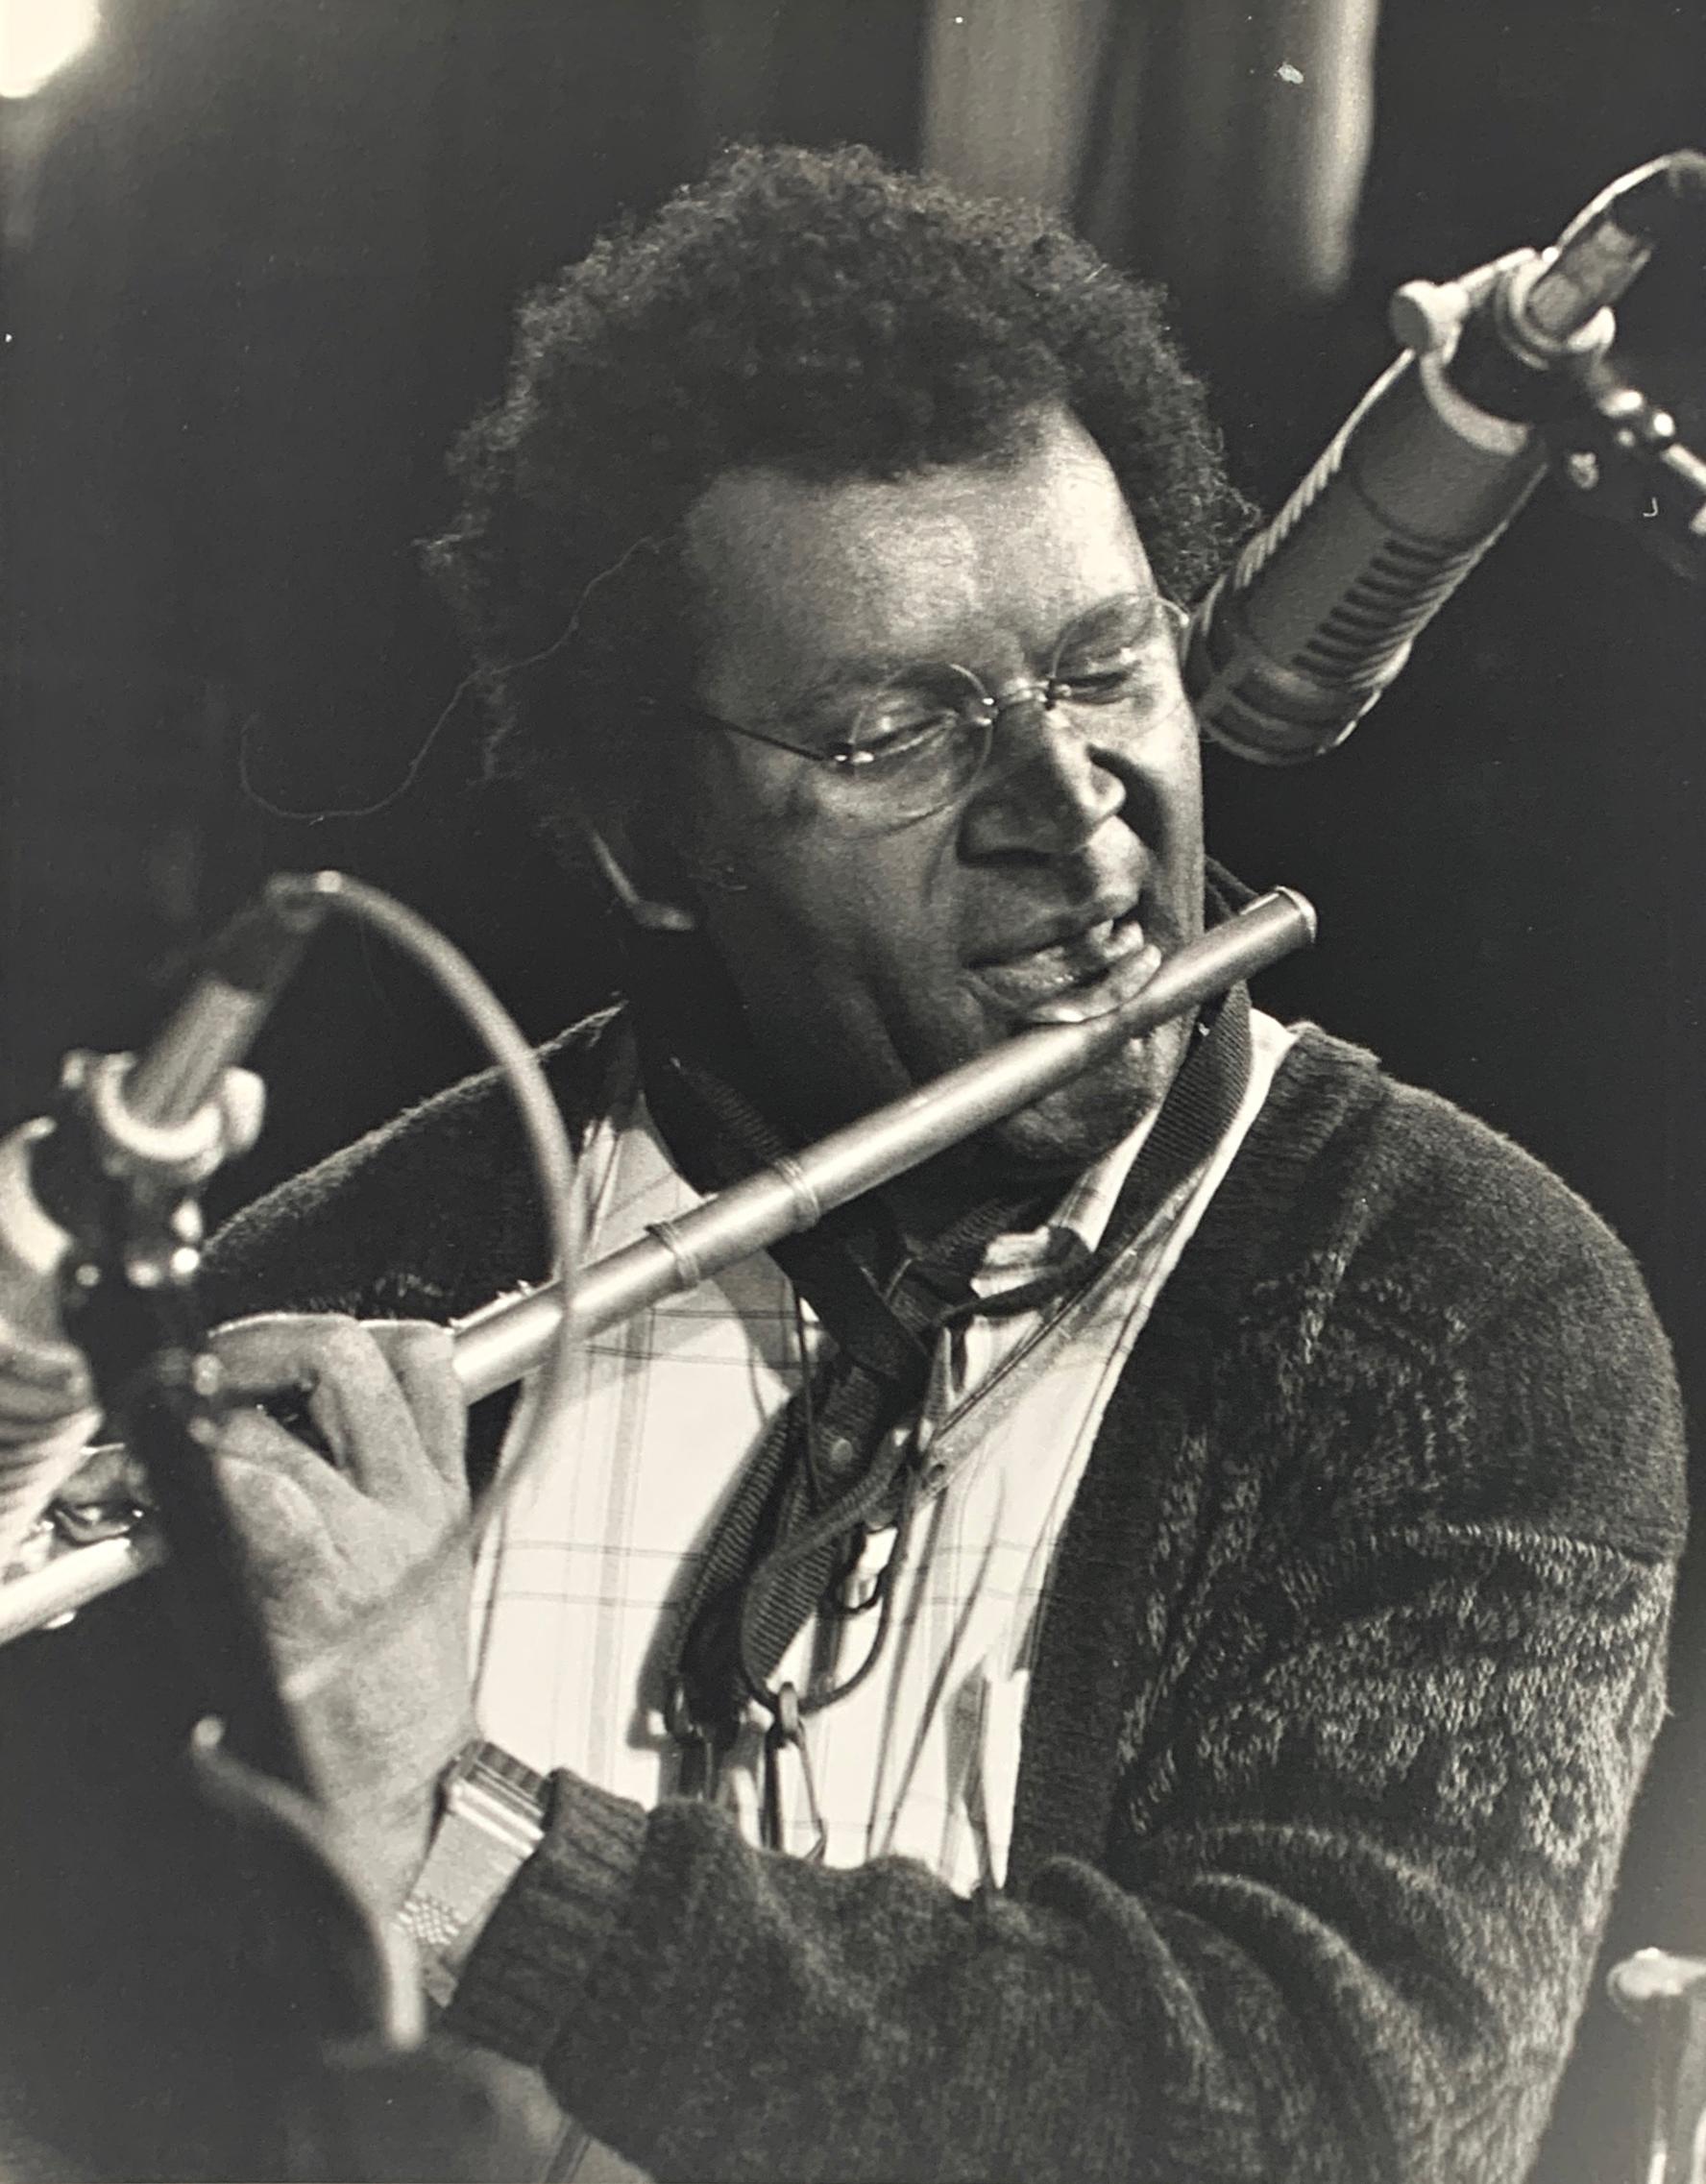 Rolf Hans
Frankfurt 1938 - 1996 Basel
Anthony Braxton, Willisau, September 2, 1990
Signed and dated on the passe-partout
Signed, dated and titled on the reverse
30.1 x 23.6 cm

Provenance: estate of the artist

The painter, sculptor and photographer